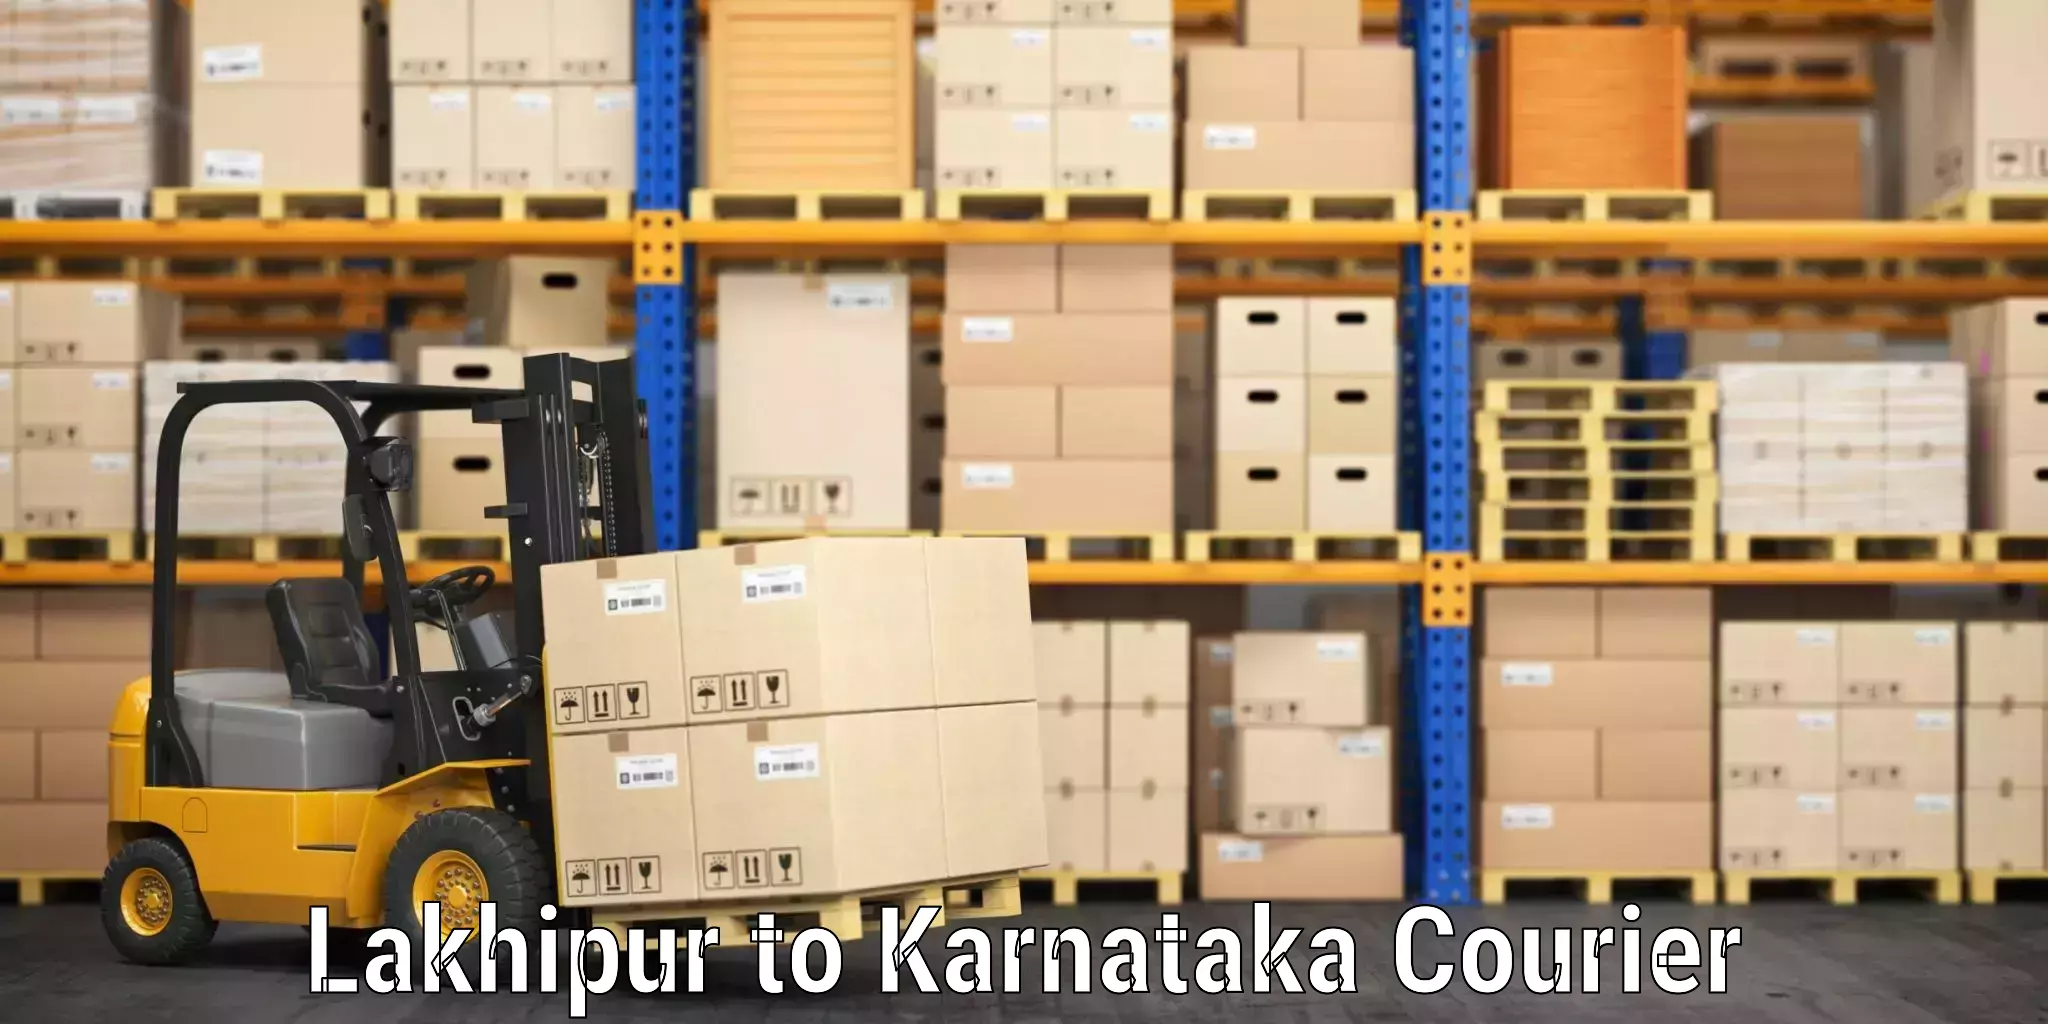 Baggage shipping calculator Lakhipur to Manipal